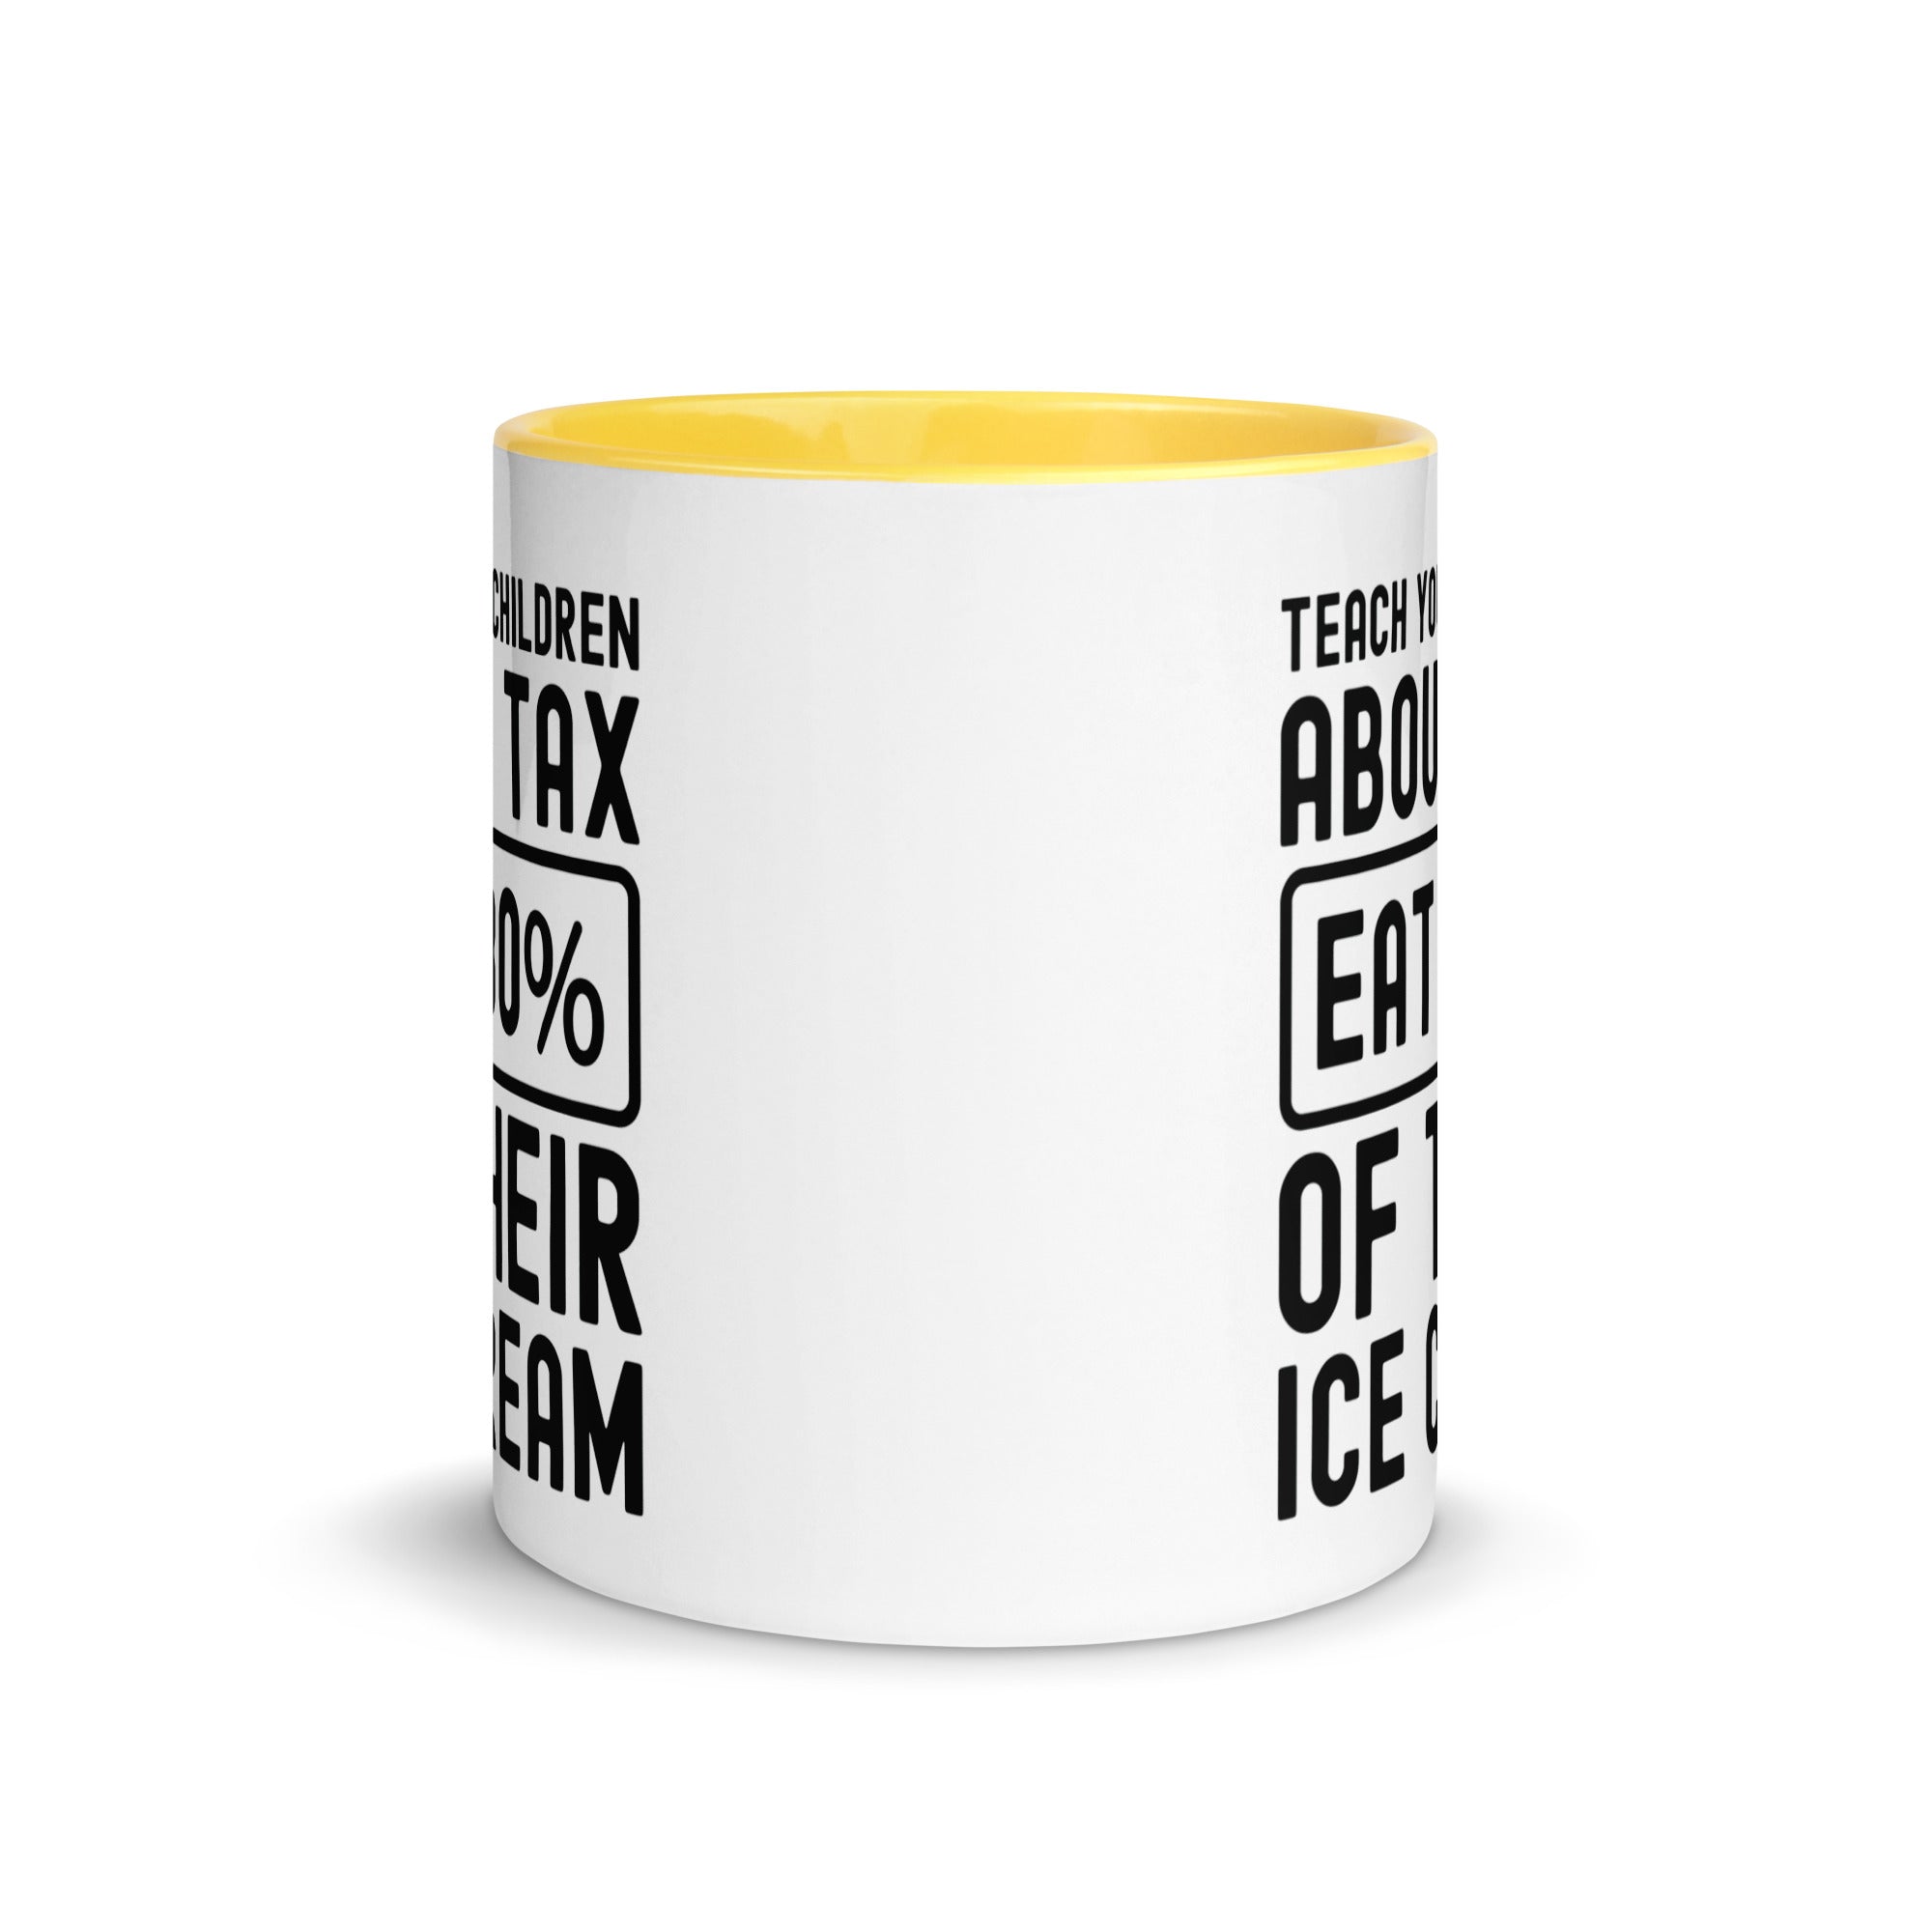 Mug with Color Inside | Teach your children about tax eat 30% of their ice cream